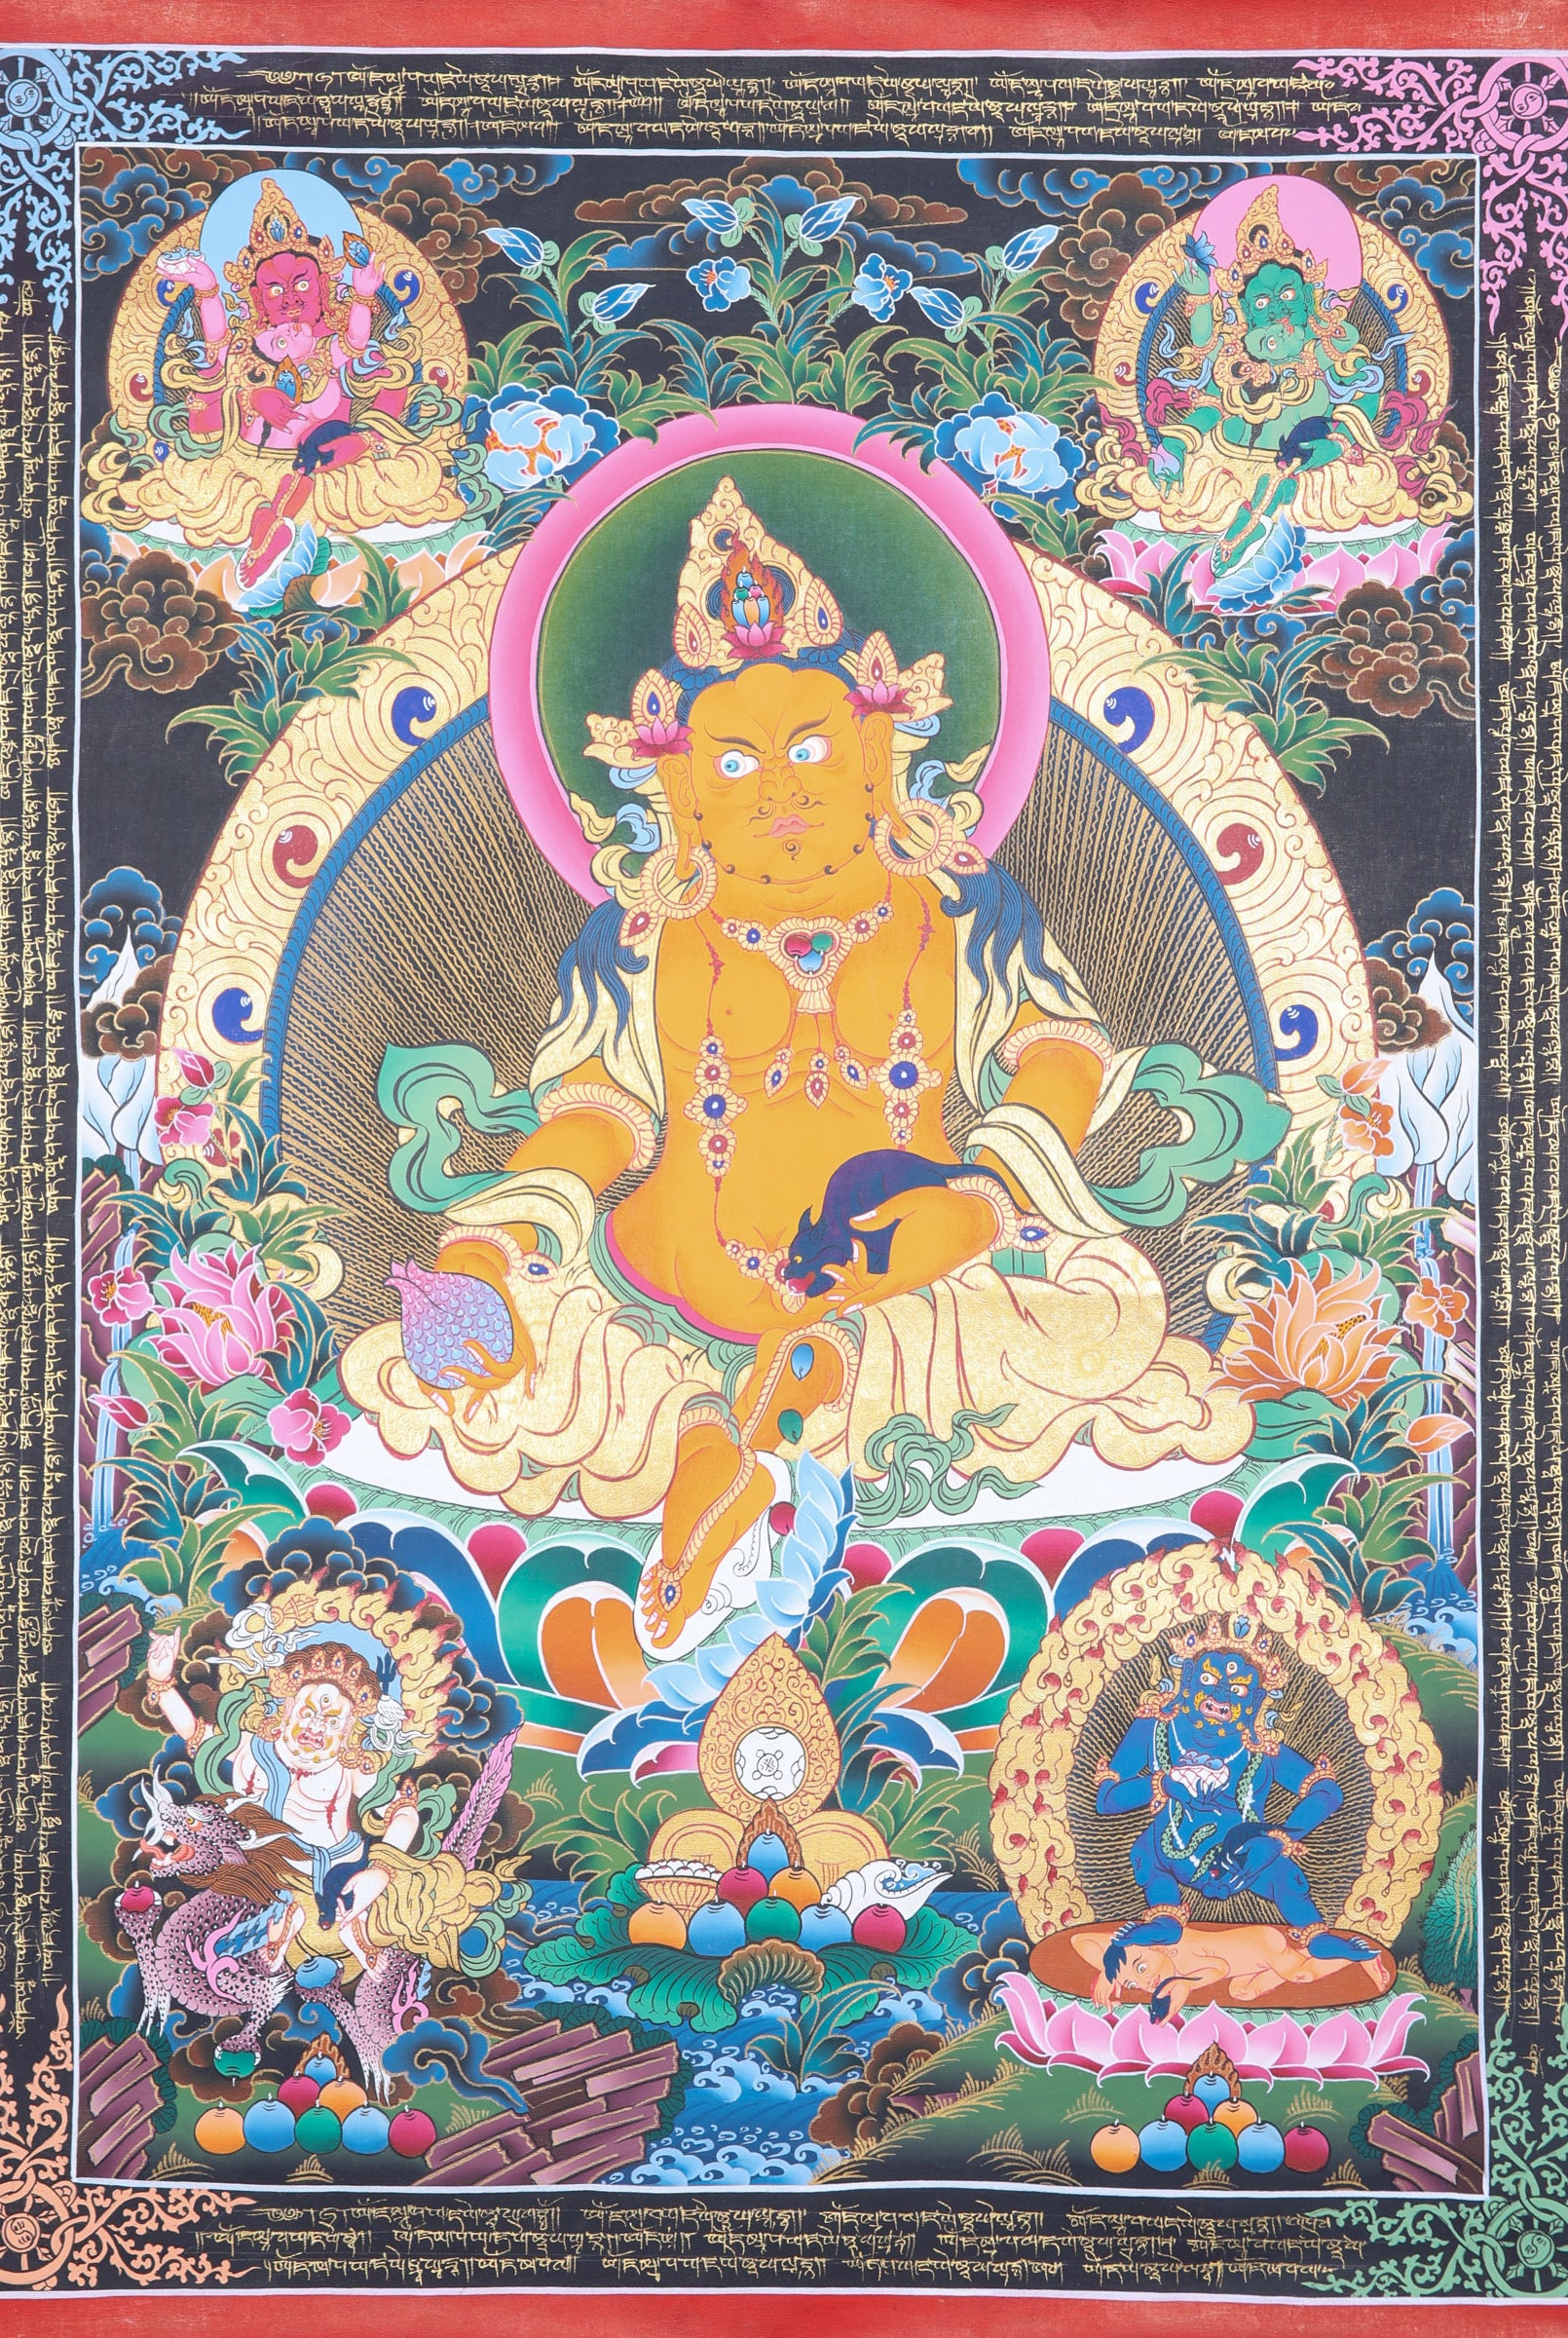 Pancha Kuber Thangka Painting for wealth and prosperity.